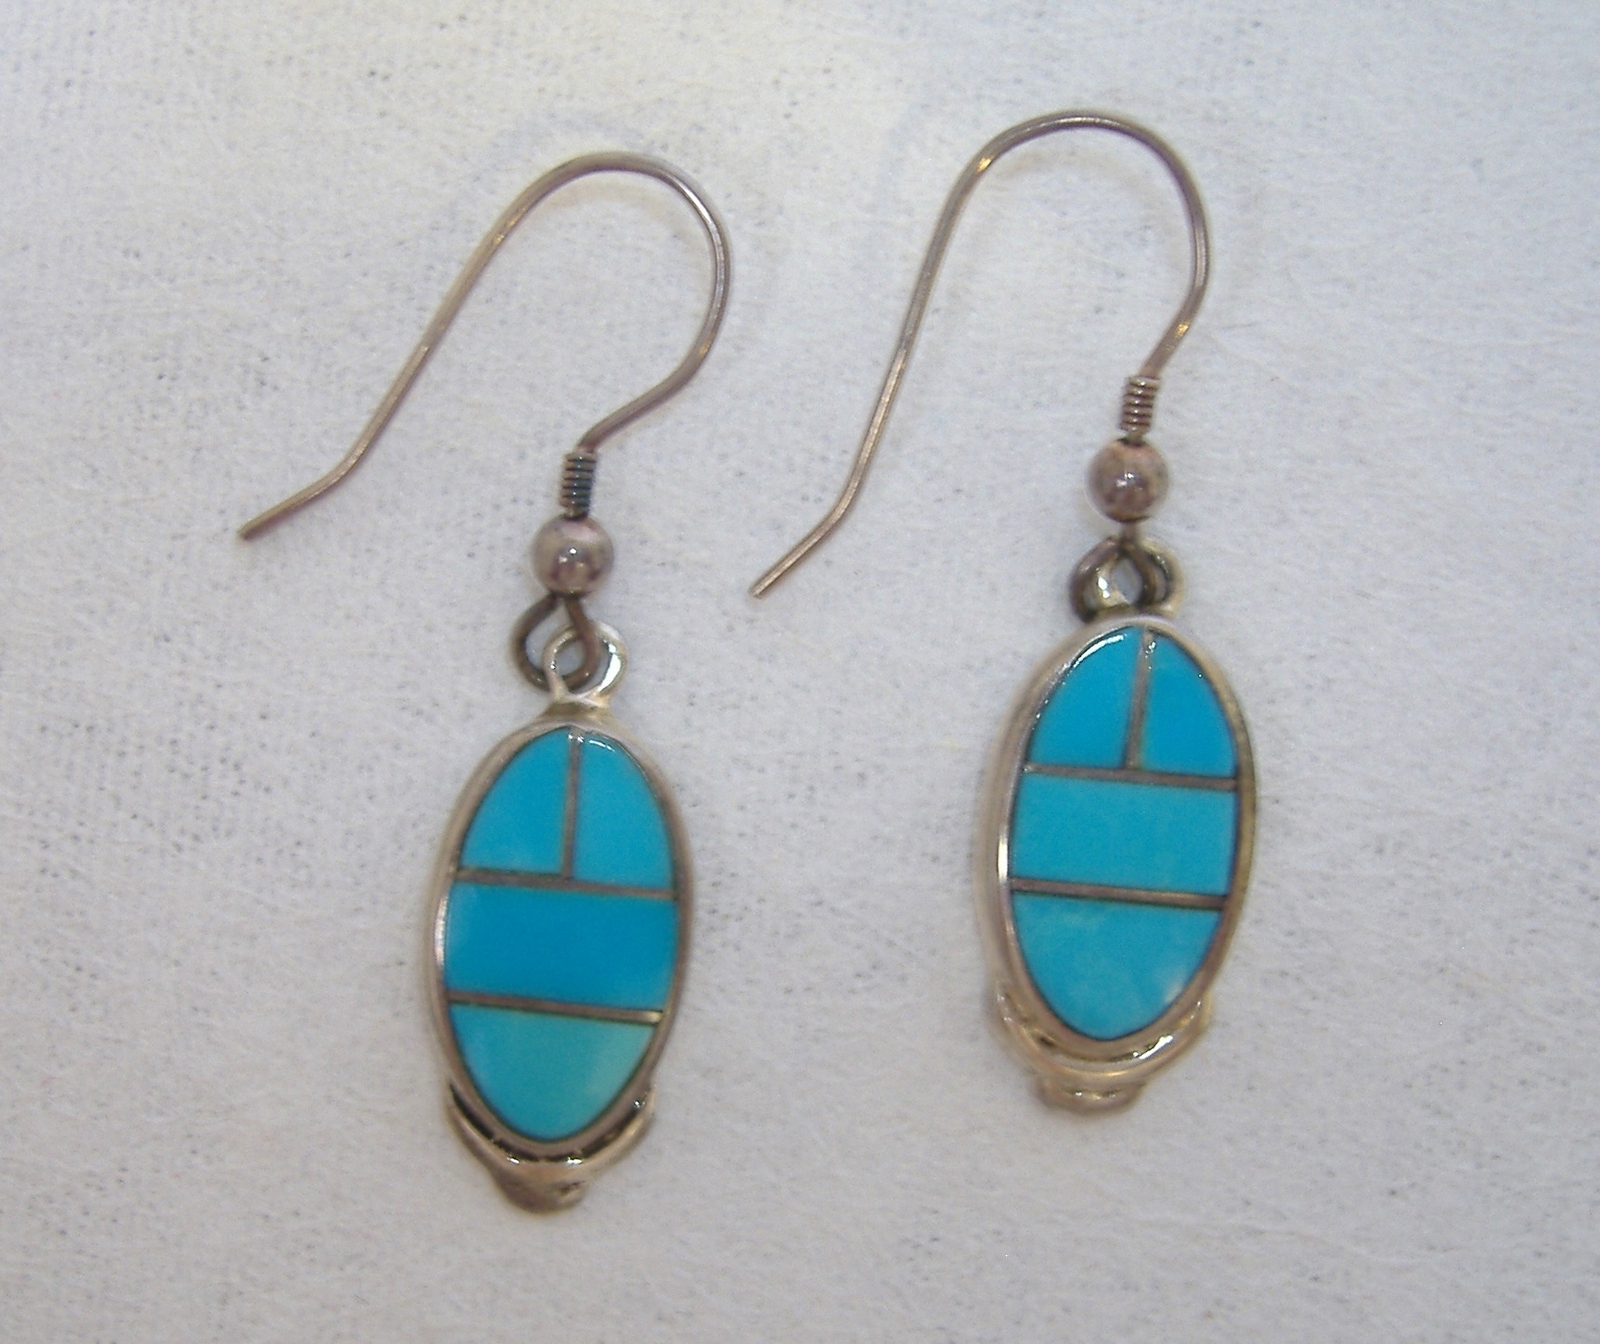 Primary image for Oval Arizona Blue Turquoise Earrings Sterling Silver Handmade Inlay Pierced 